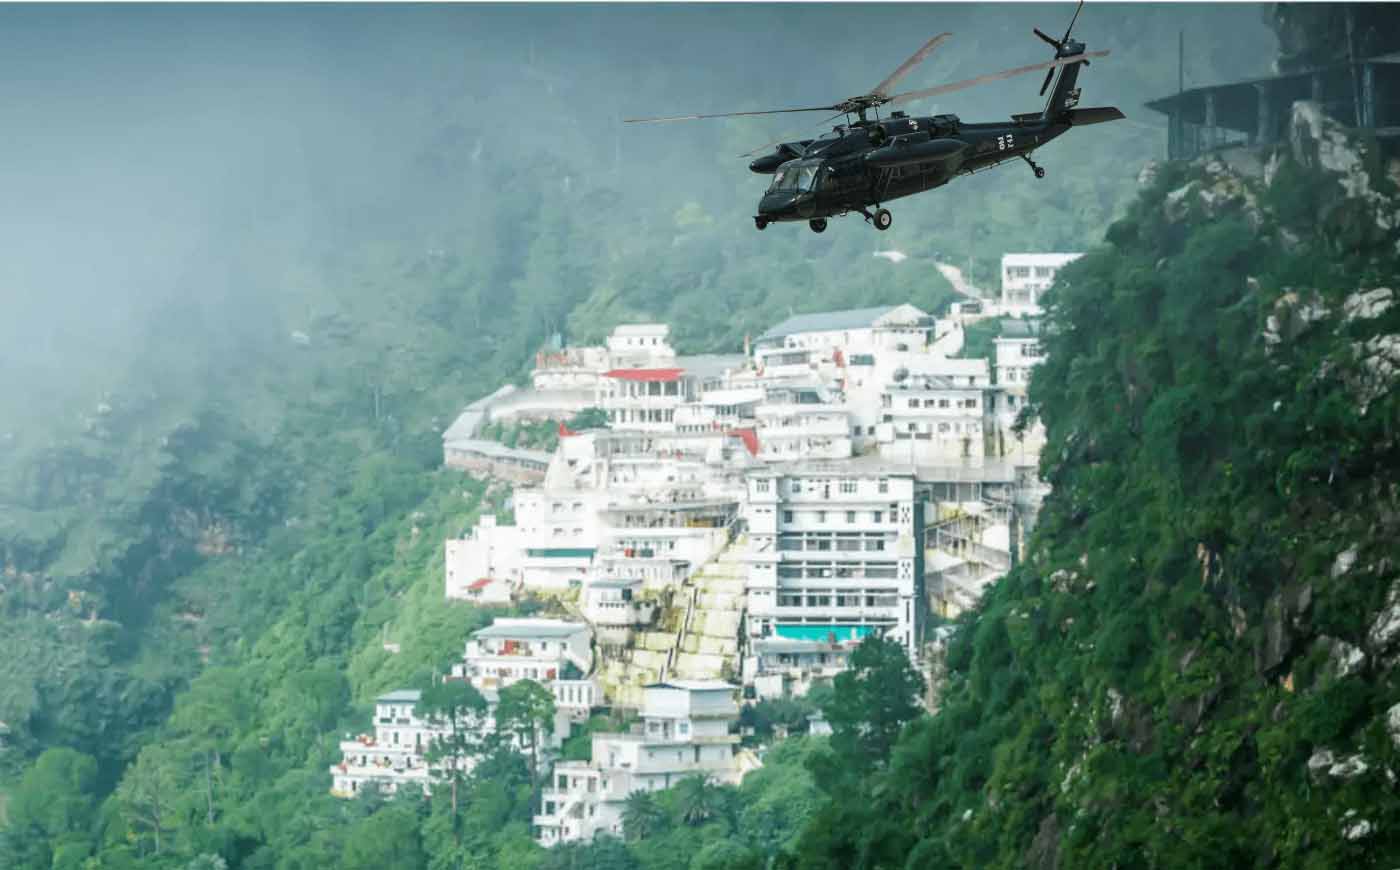 Book your helicopter tickets early for hassle free darshan